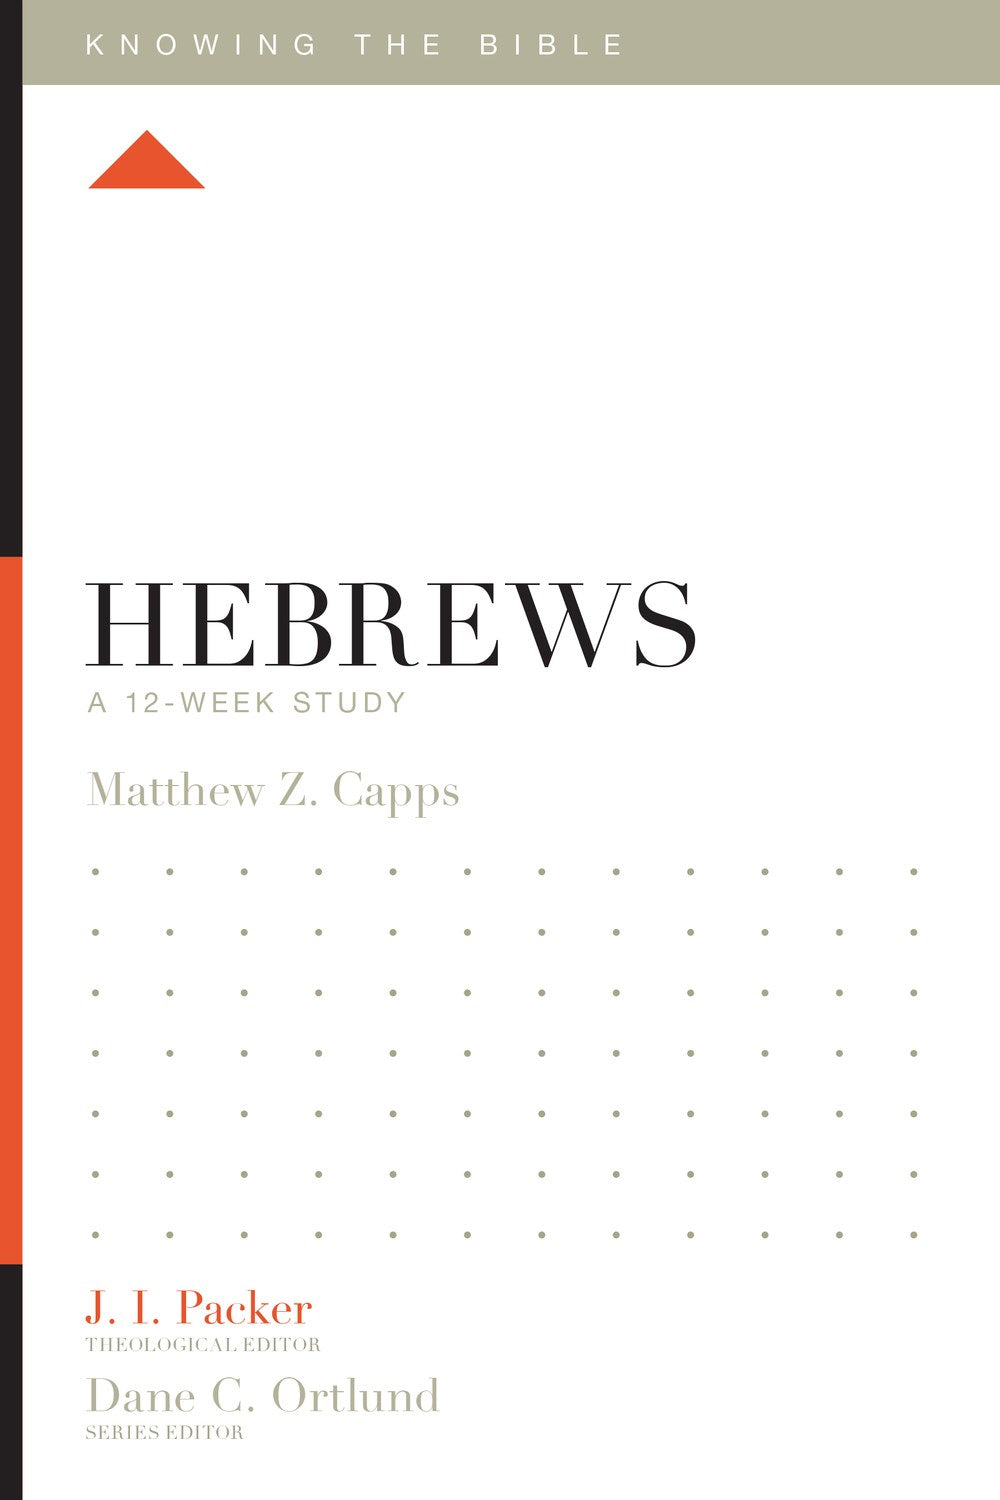 Hebrews: A 12-Week Study (Knowing The Bible)